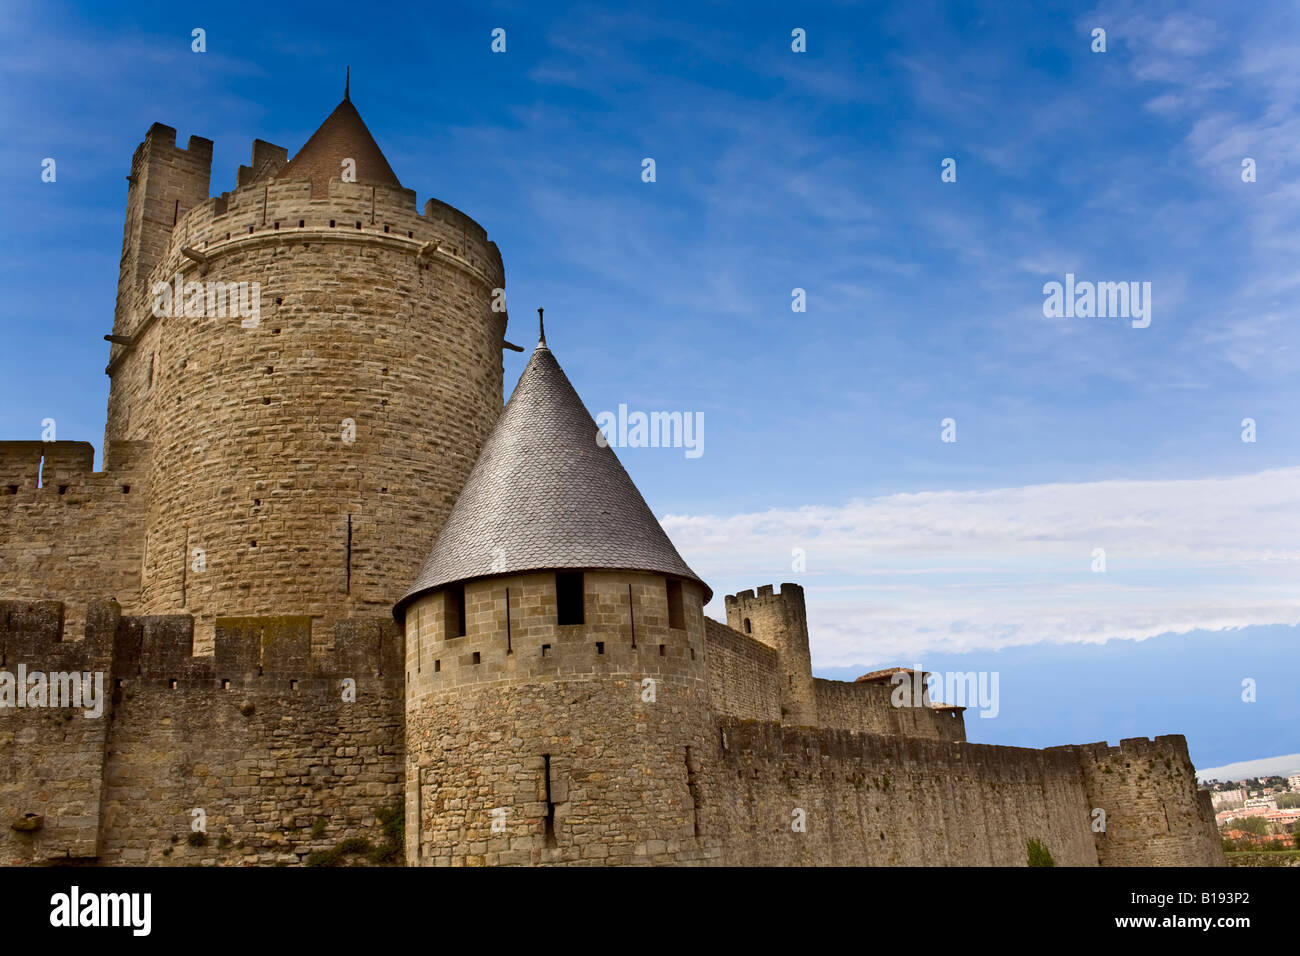 FRANCE, CARCASSONNE. Carcassonne in France fortified medieval castle Stock Photo